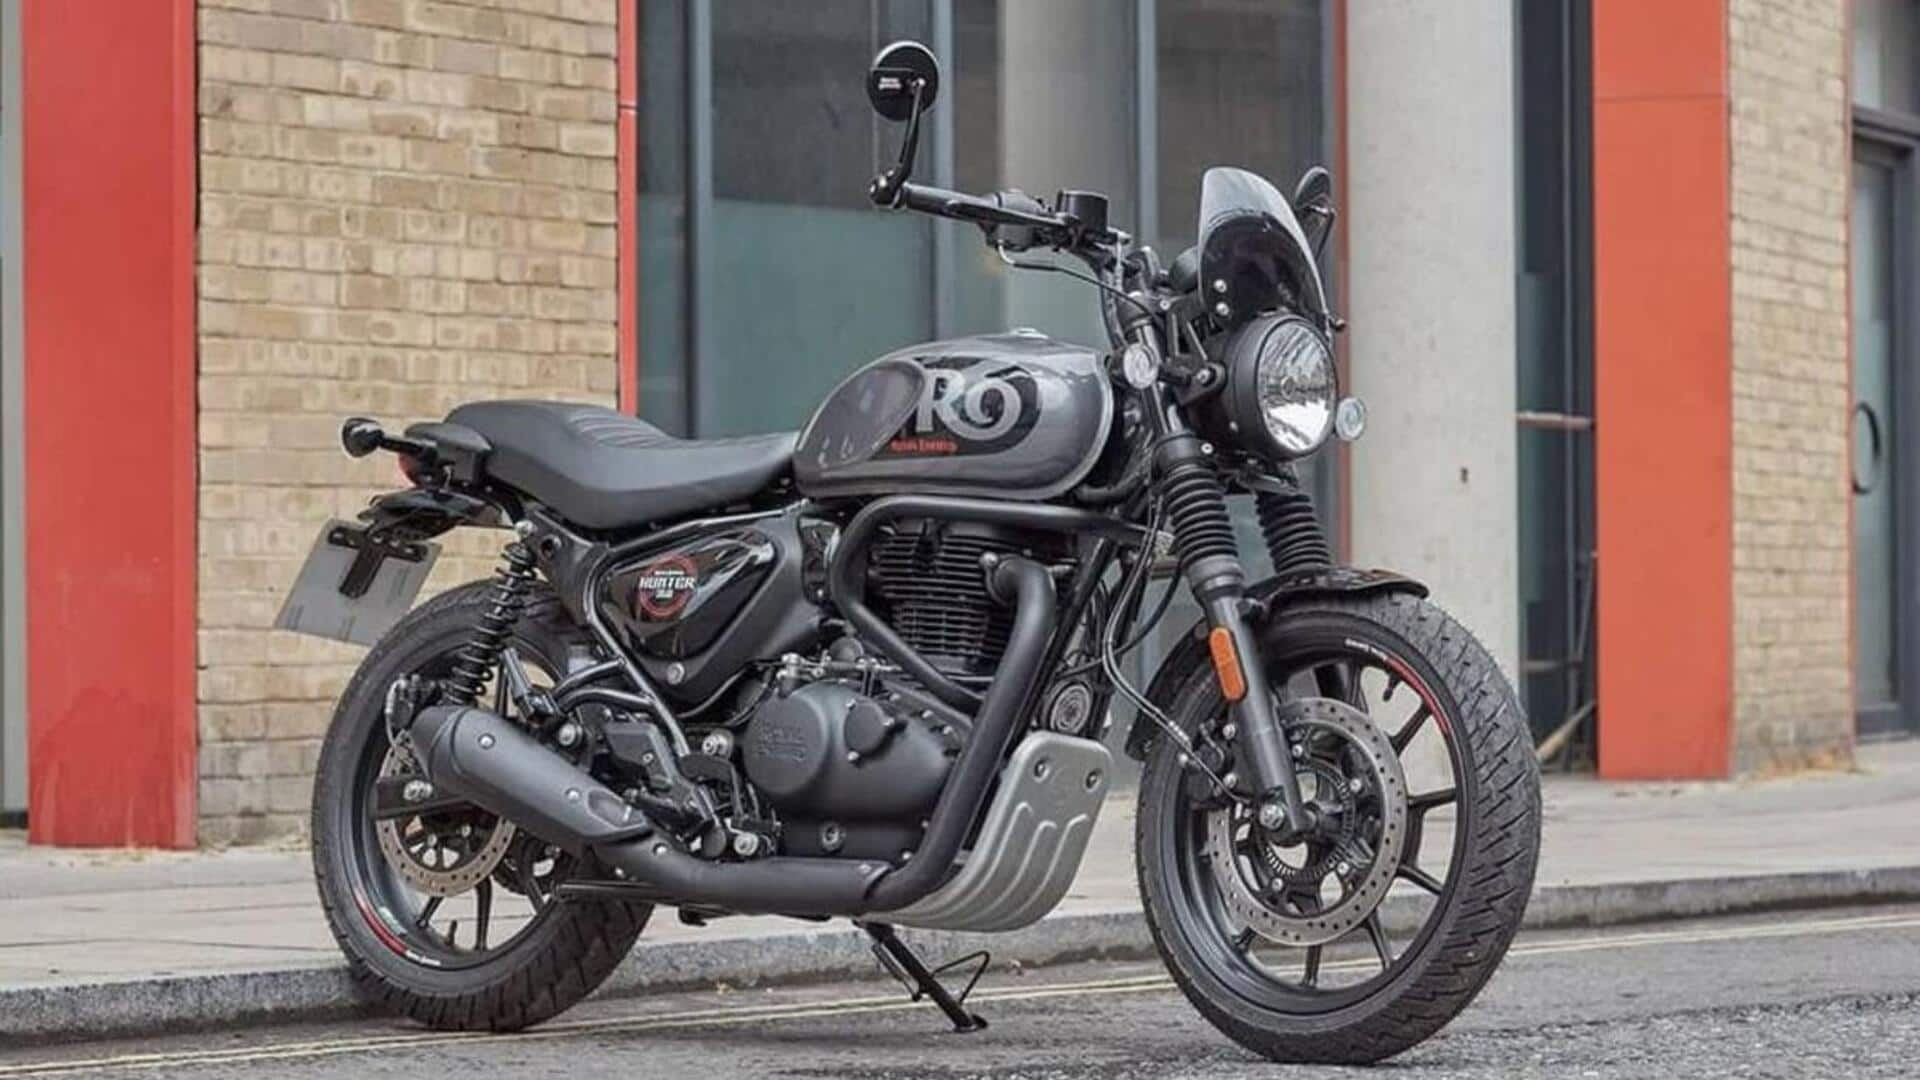 Spy shots fully reveal the new Royal Enfield Hunter 450